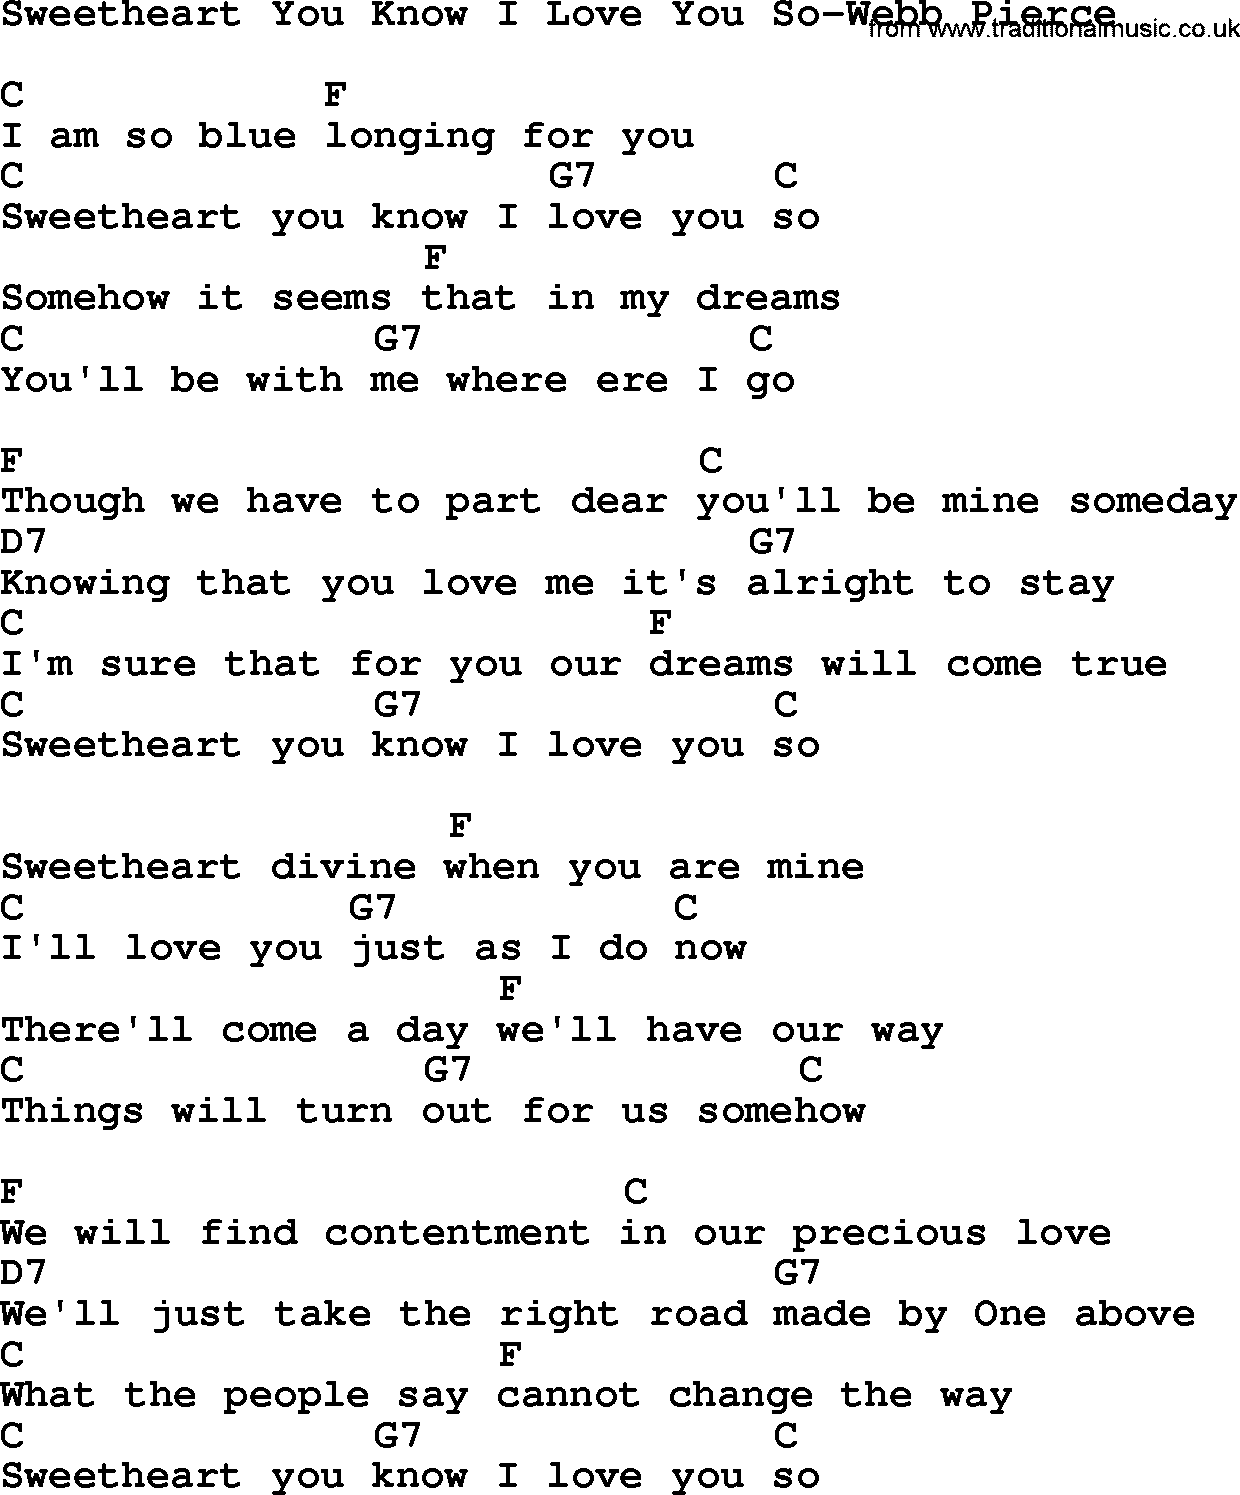 Country music song: Sweetheart You Know I Love You So-Webb Pierce lyrics and chords